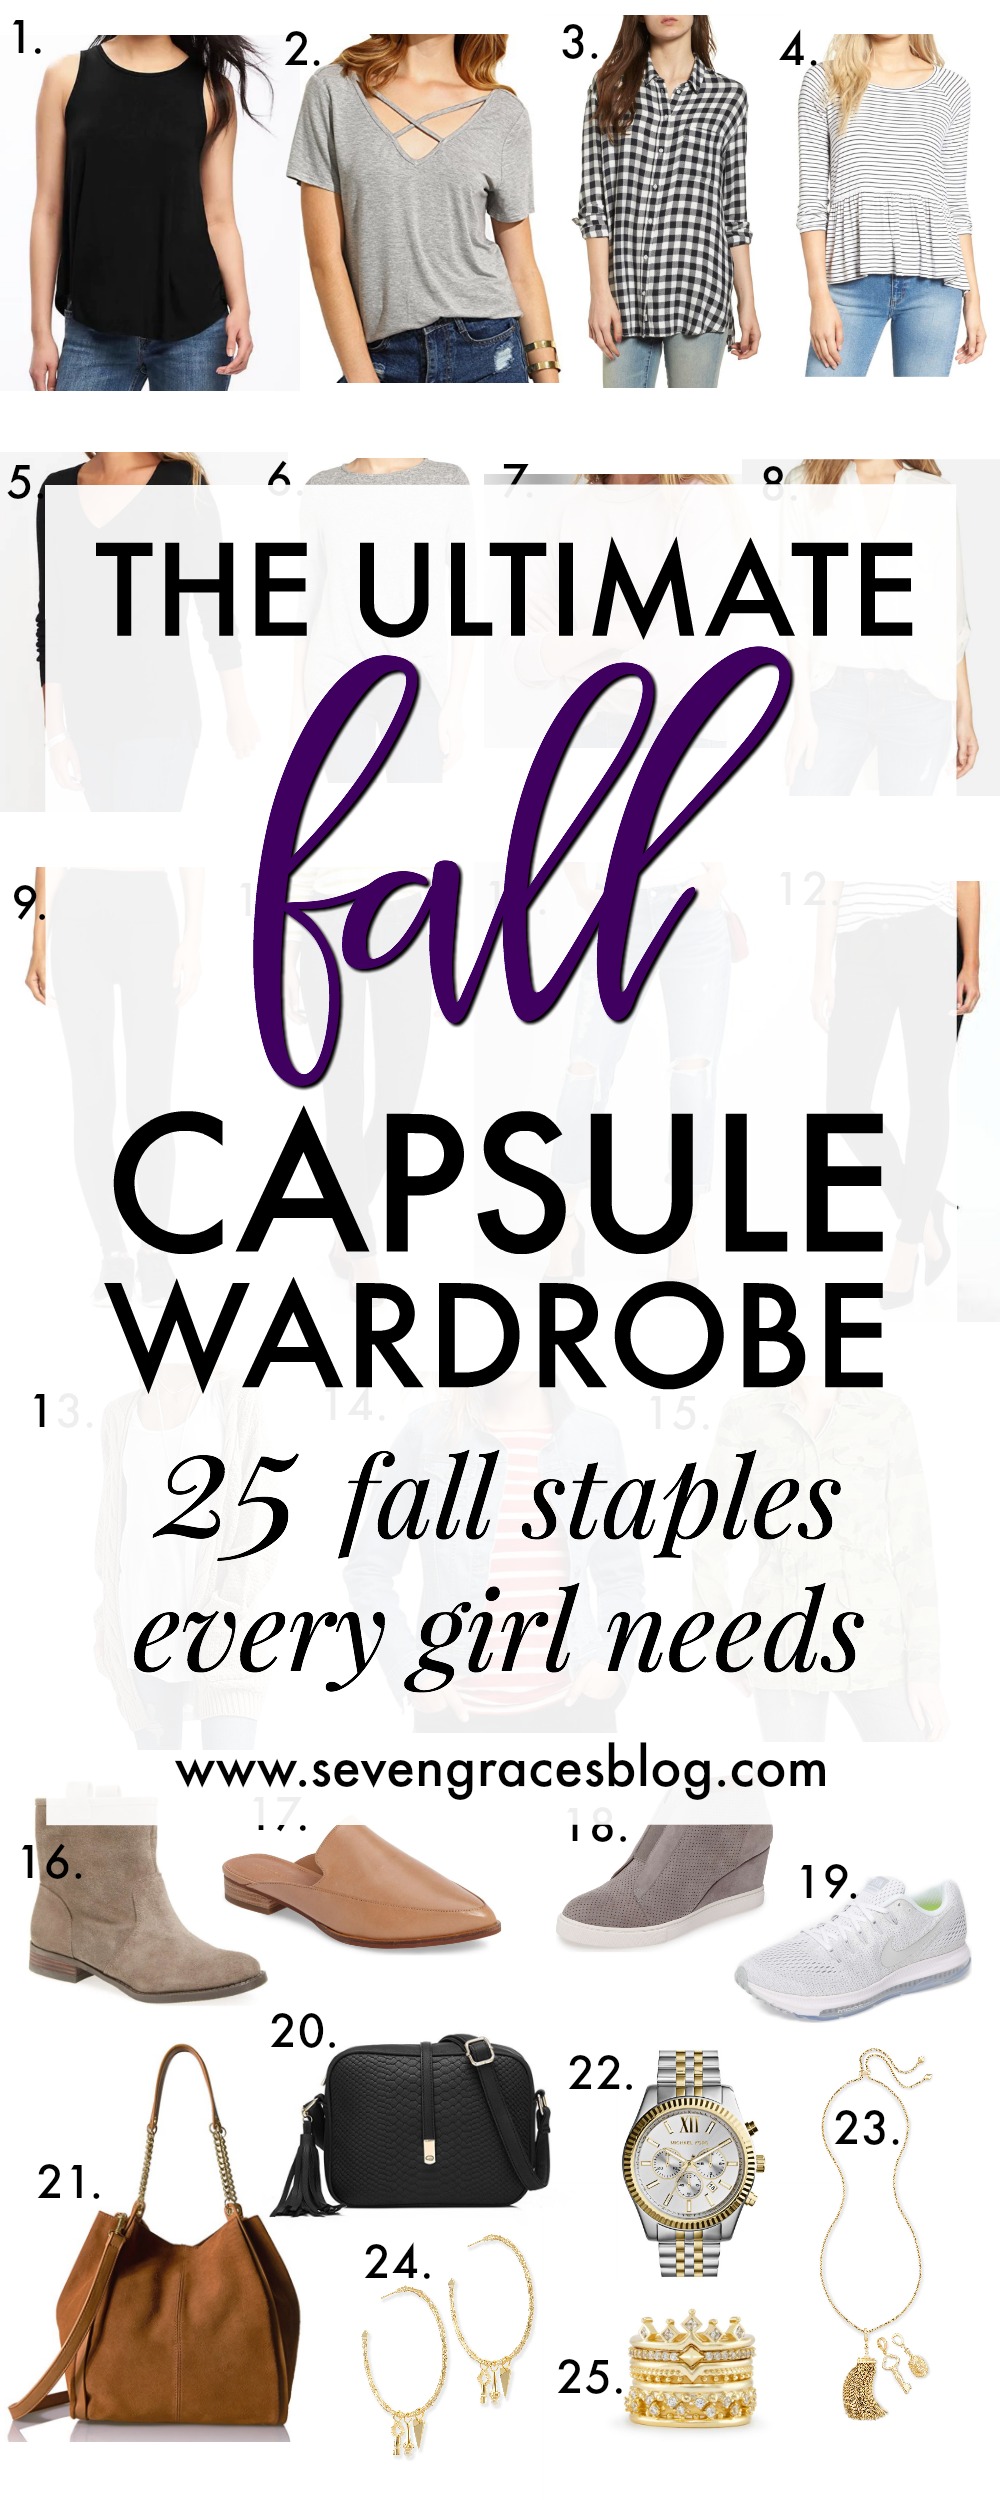 The ultimate fall capsule wardrobe for the busy mom who wants to stay stylish but comfy. Endless outfit combos with only 25 pieces! #capsulewardrobe #momcapsulewardrobe #fallcapsulewardrobe